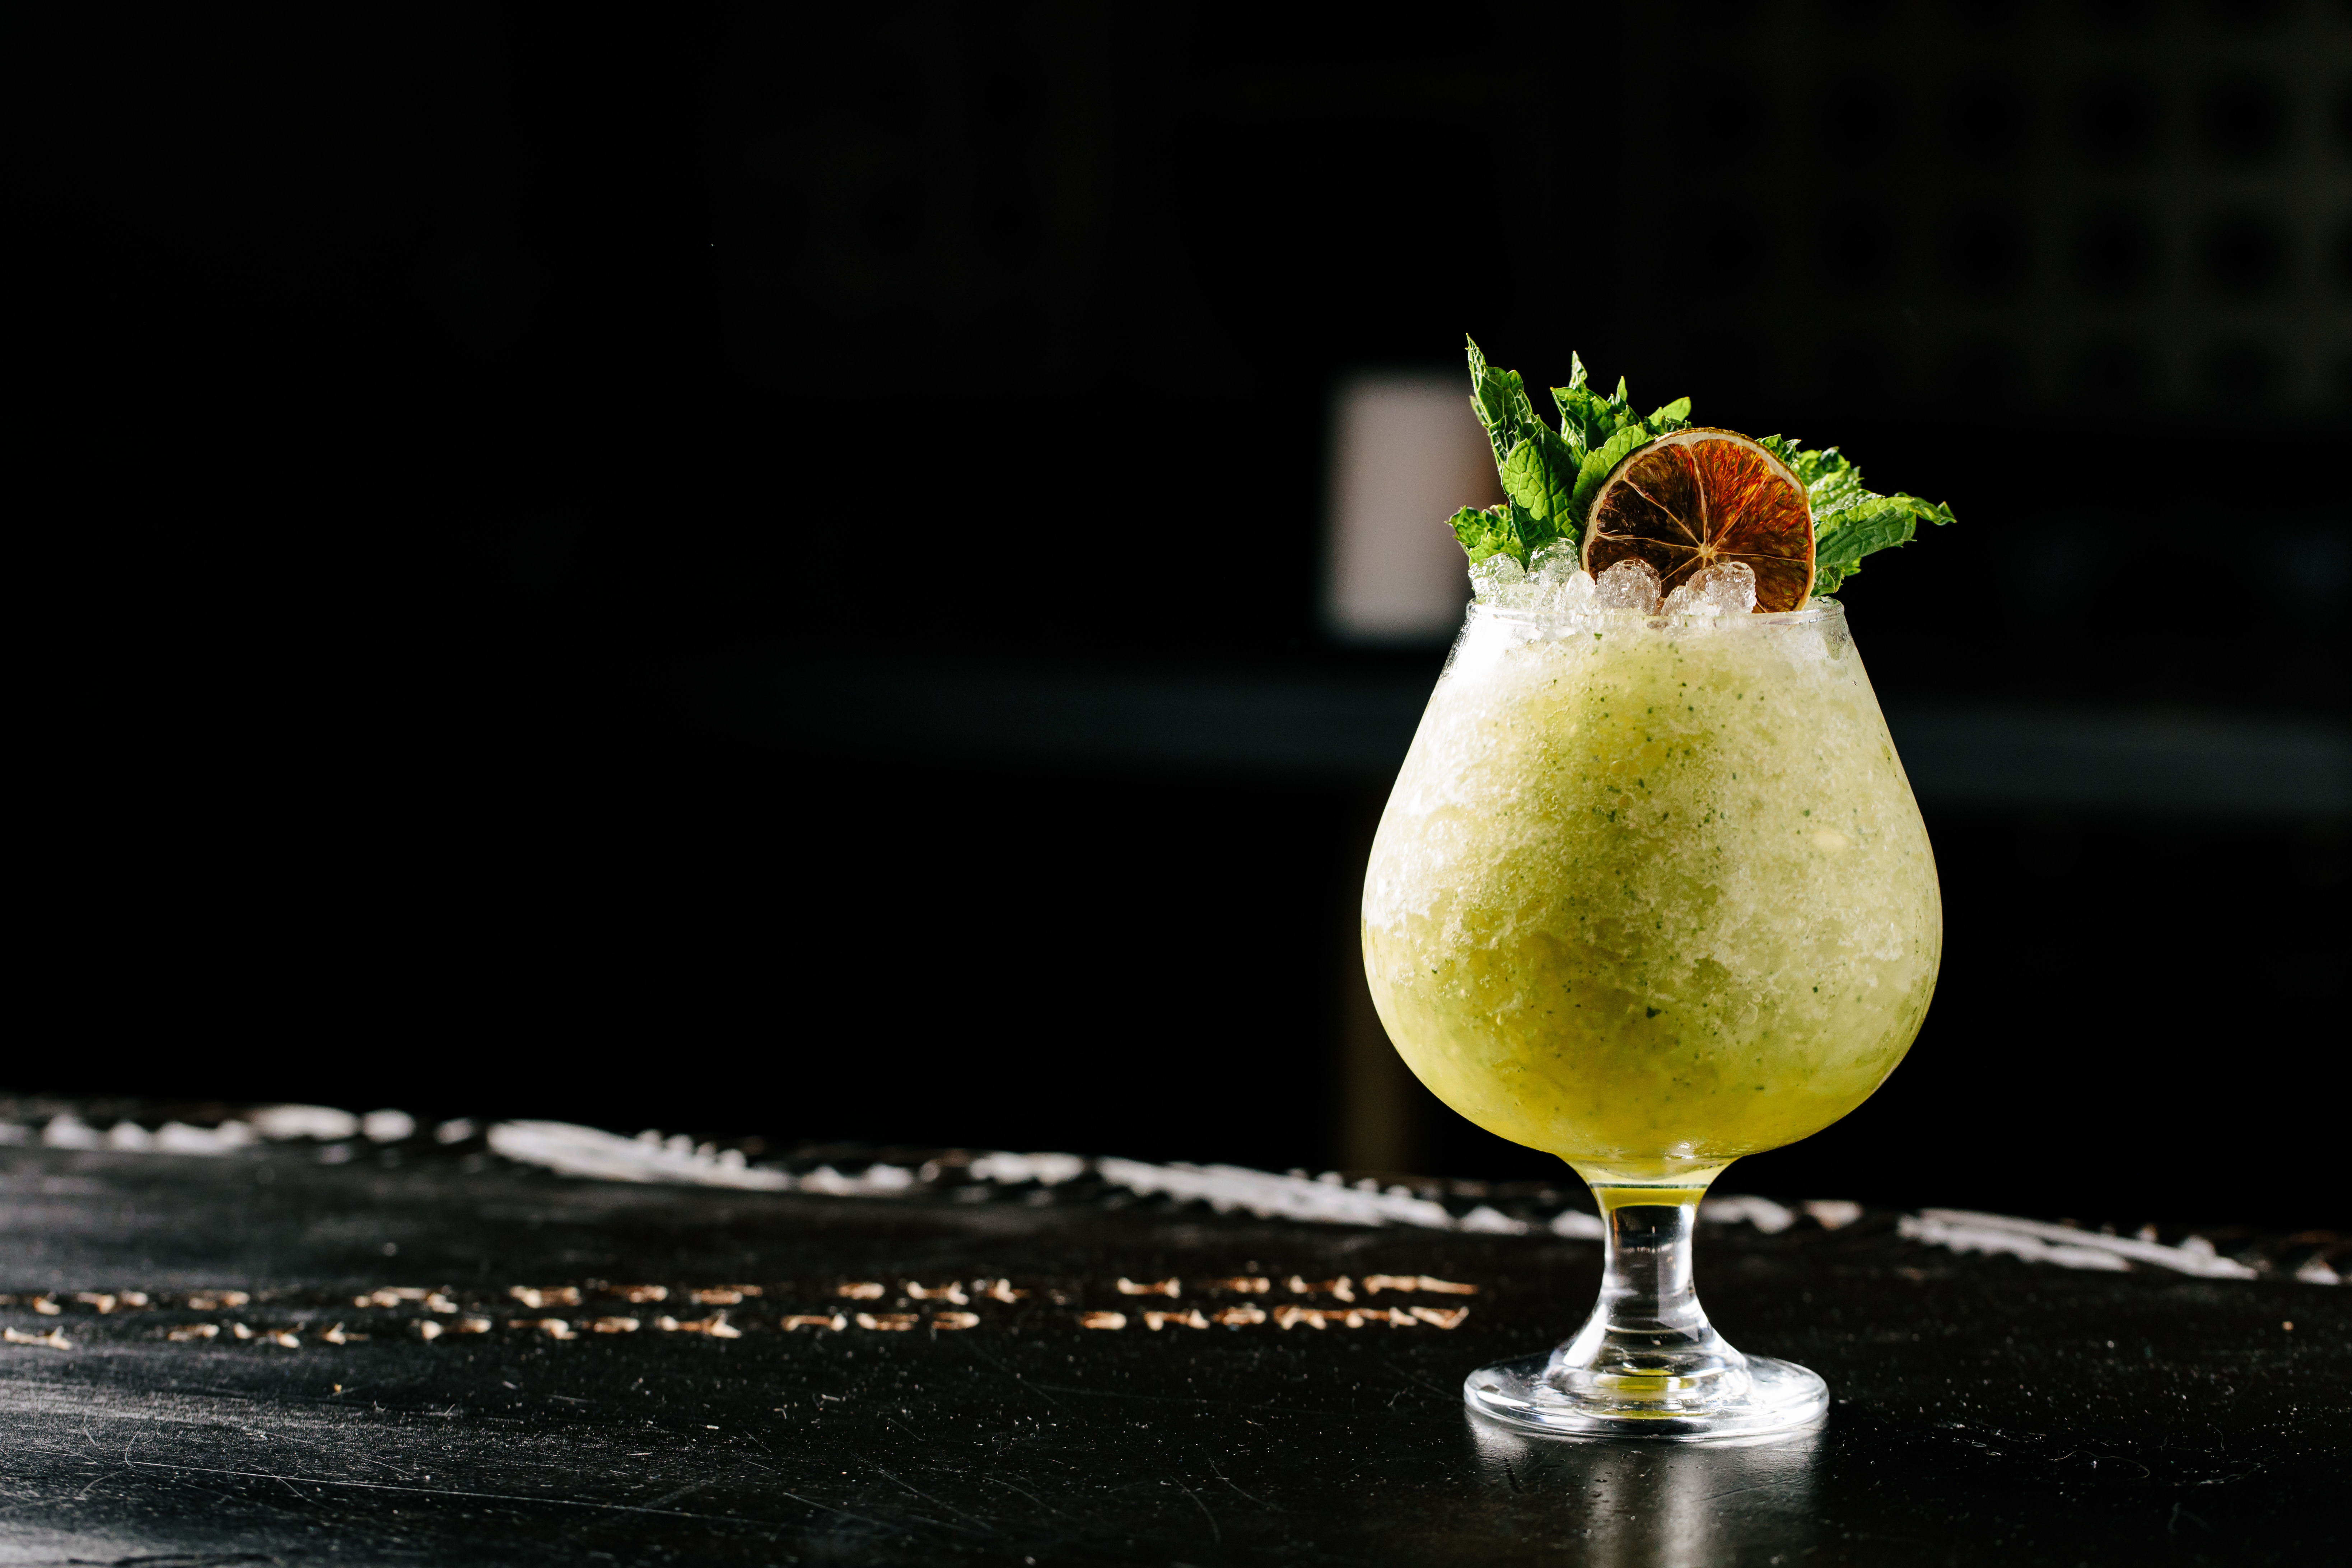 A greenish cocktail with lots of ice and green garnishes in a clear goblet glass on a black surface.